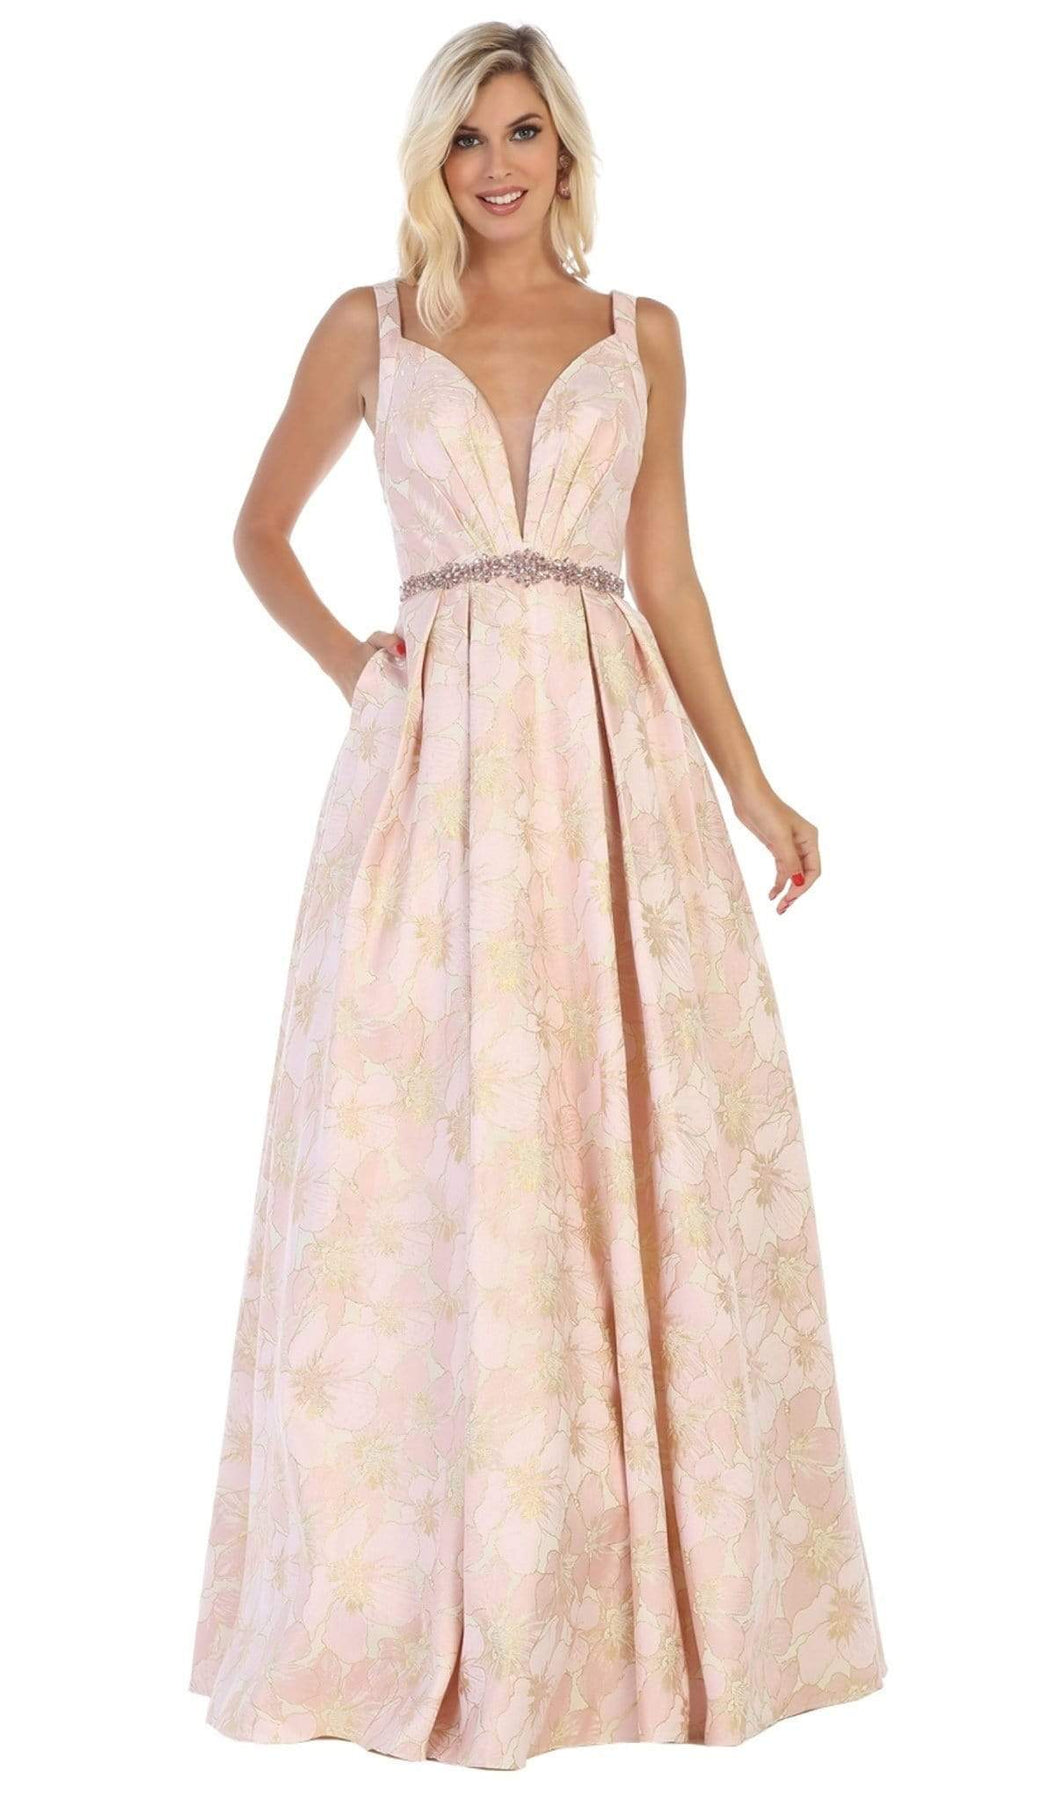 May Queen - RQ7715 Pleated V-Neck A-Line Evening Gown Special Occasion Dress 4 / Pink